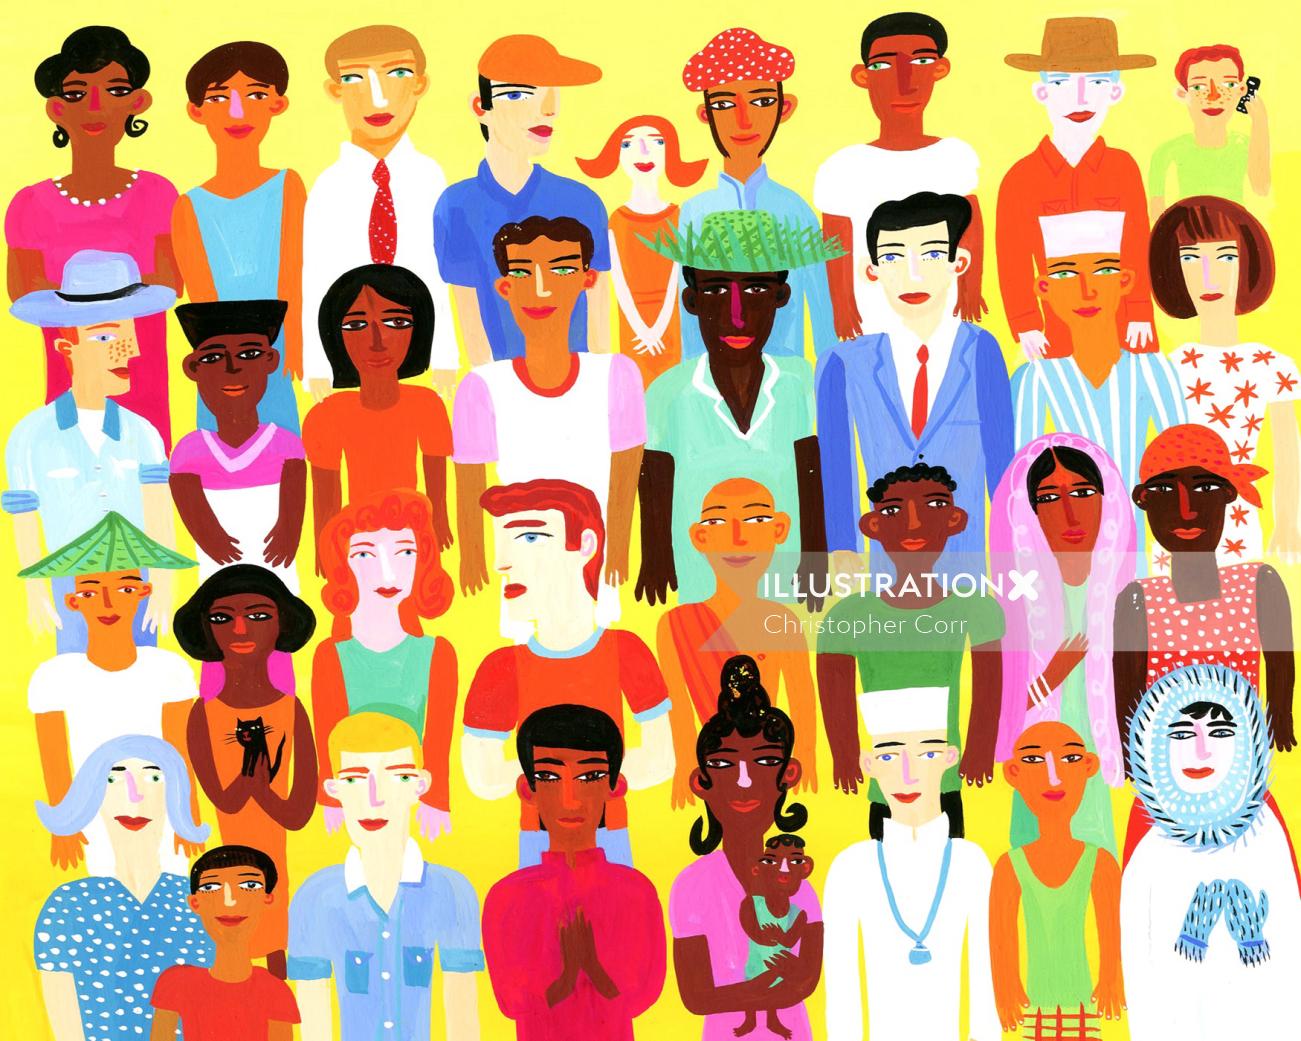 All people around the world in a picture - an illustration by Christopher Corr